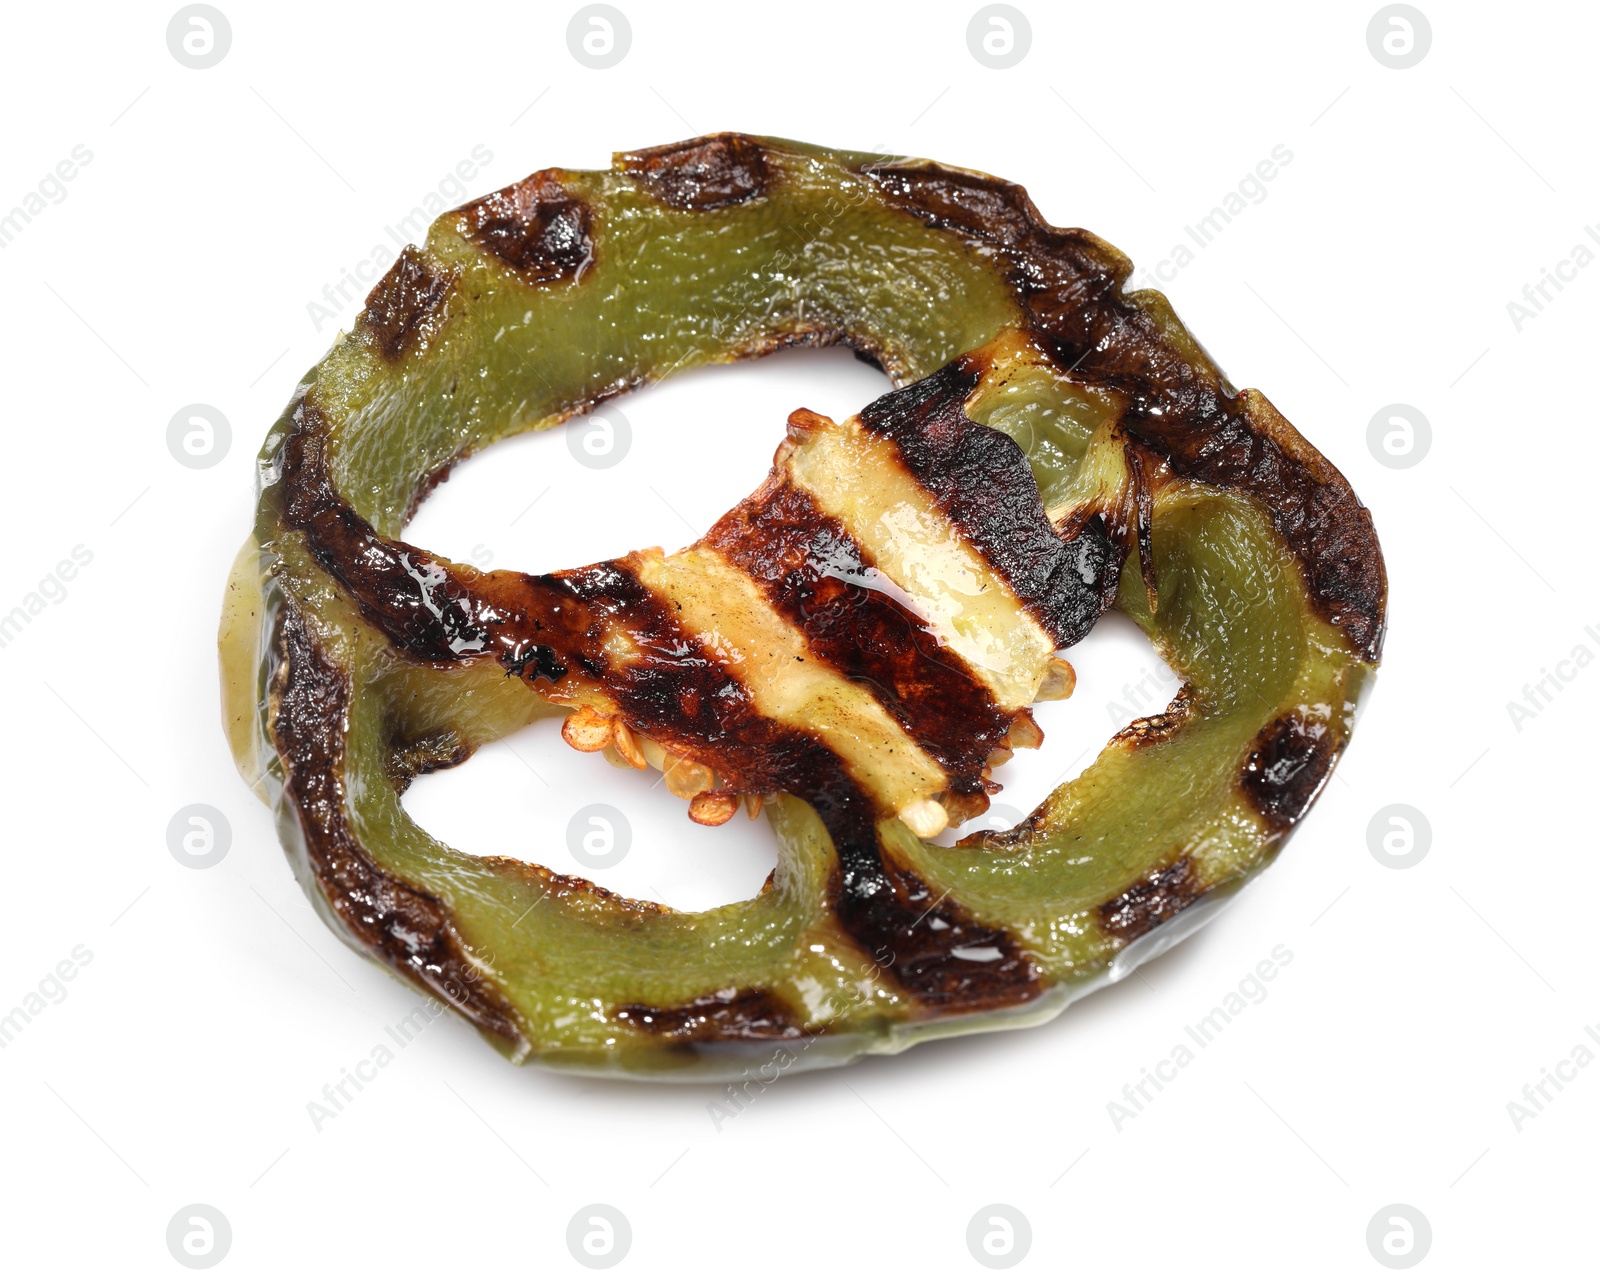 Photo of Slice of grilled green chili pepper isolated on white